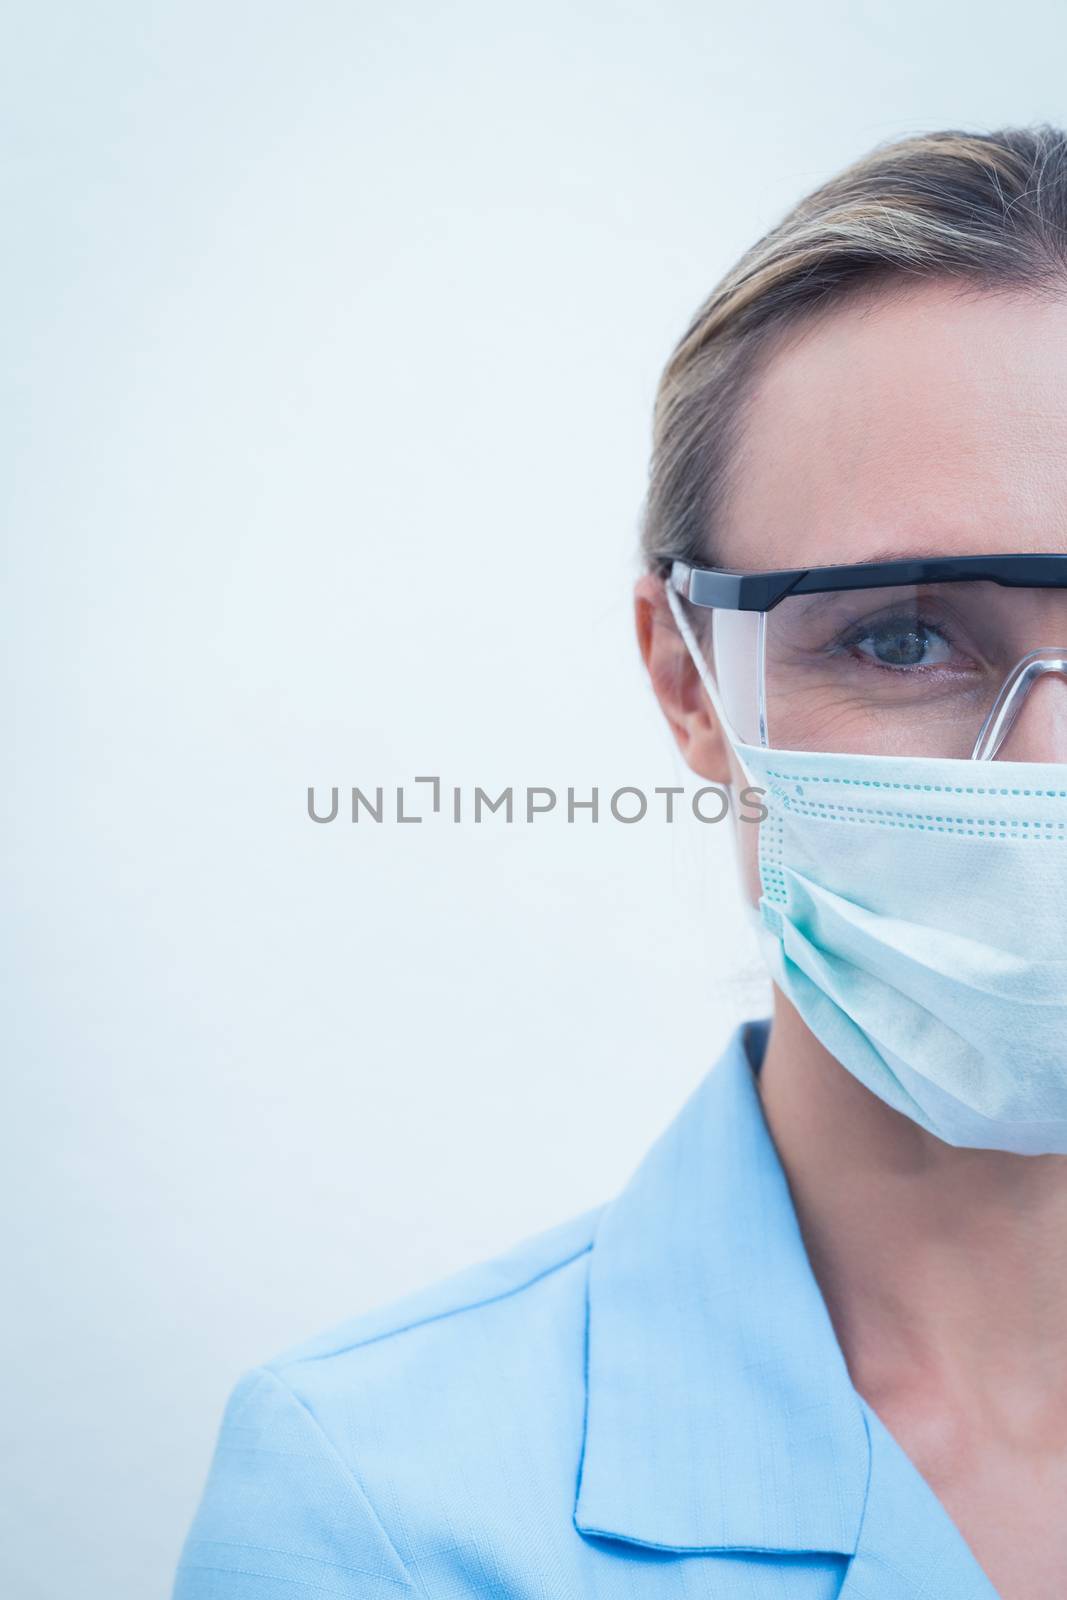 Female dentist wearing surgical mask and safety glasses by Wavebreakmedia